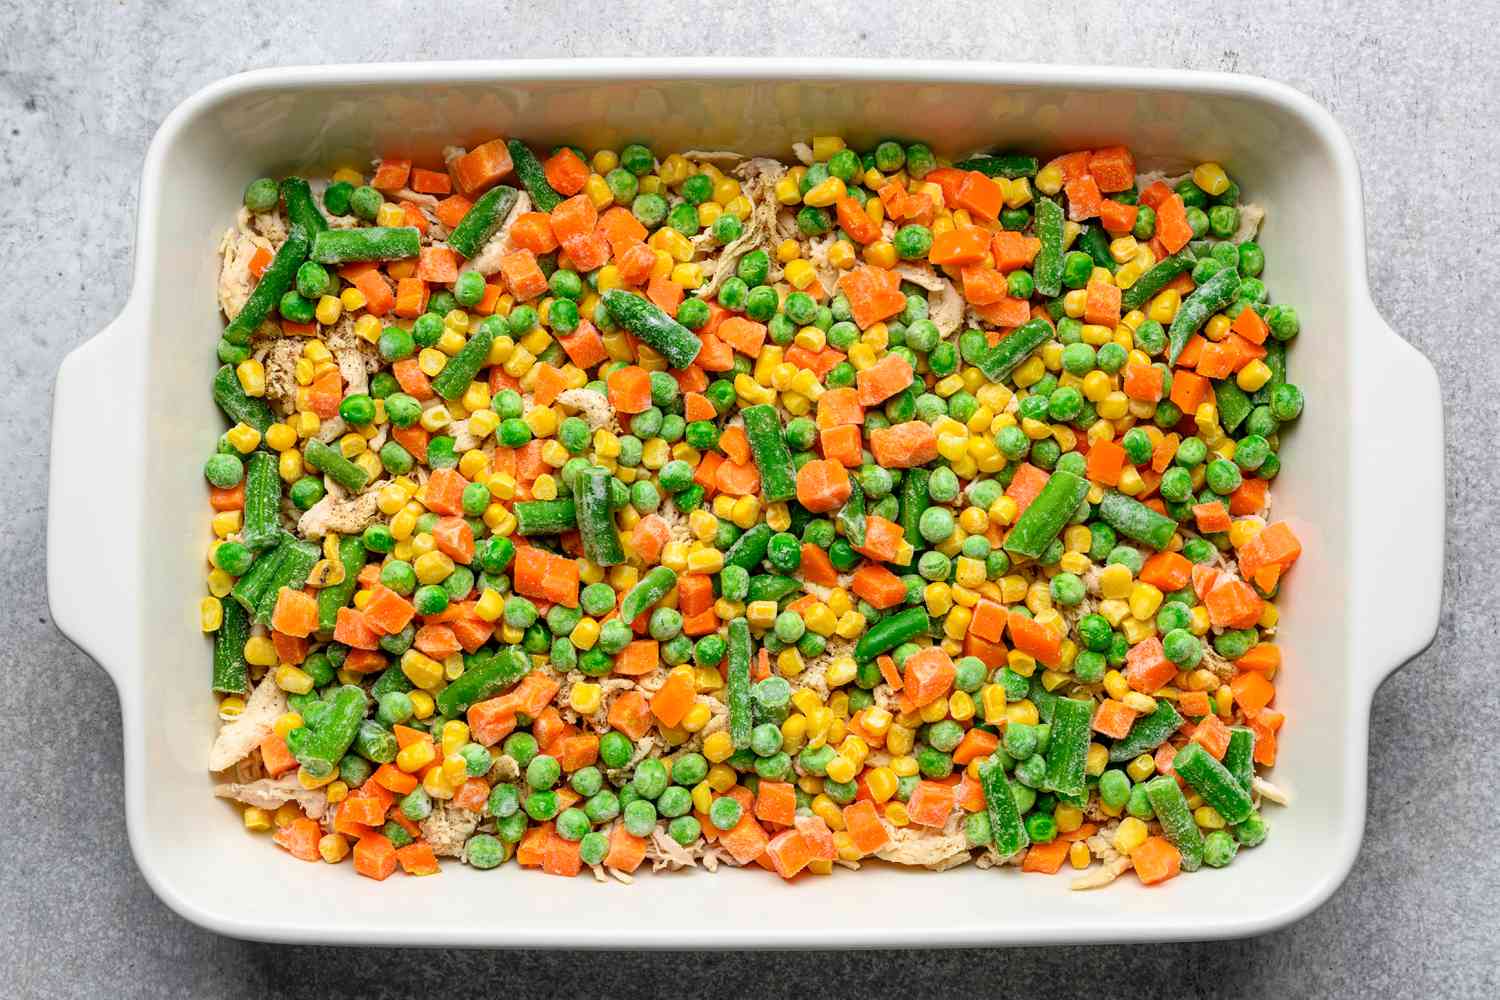 Salt, pepper, and frozen vegetables layered on top of the shredded chicken